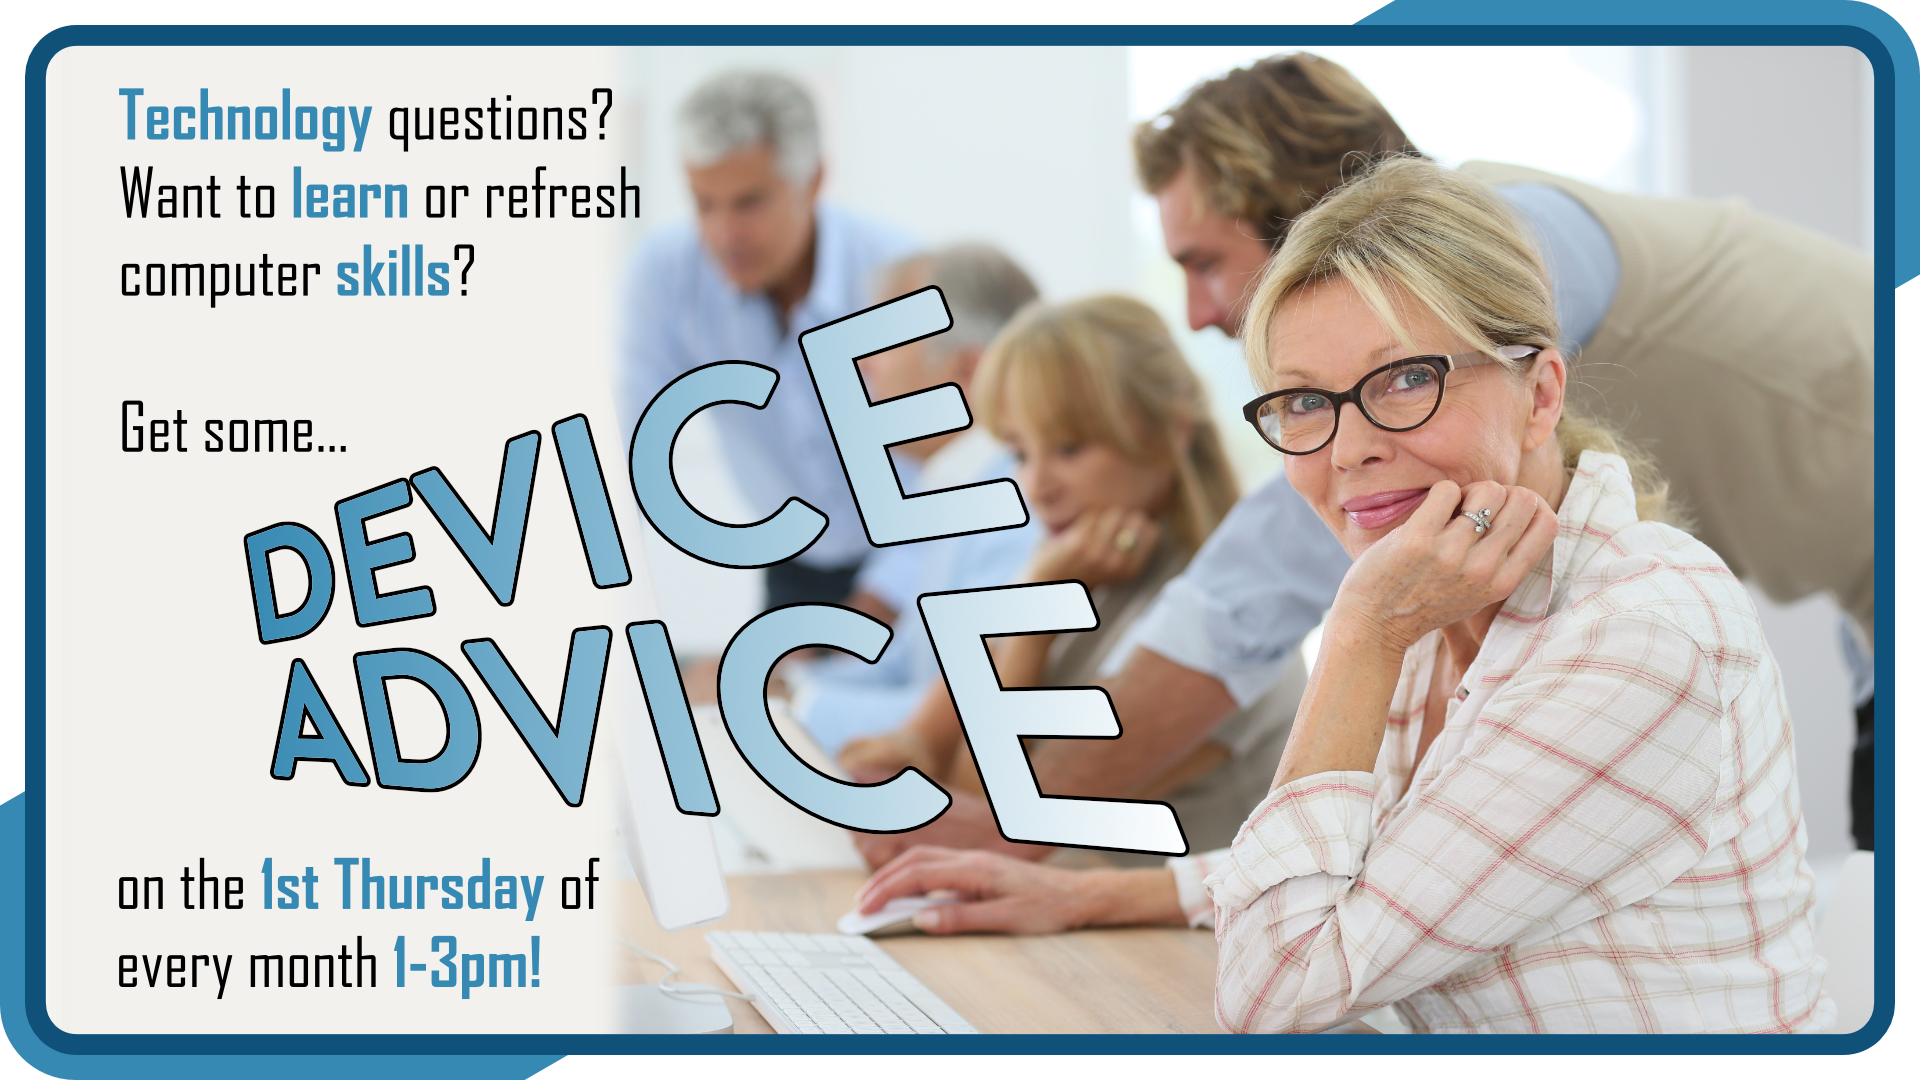 Device Advice, first Thursday monthly at 1pm, intended for seniors 55+